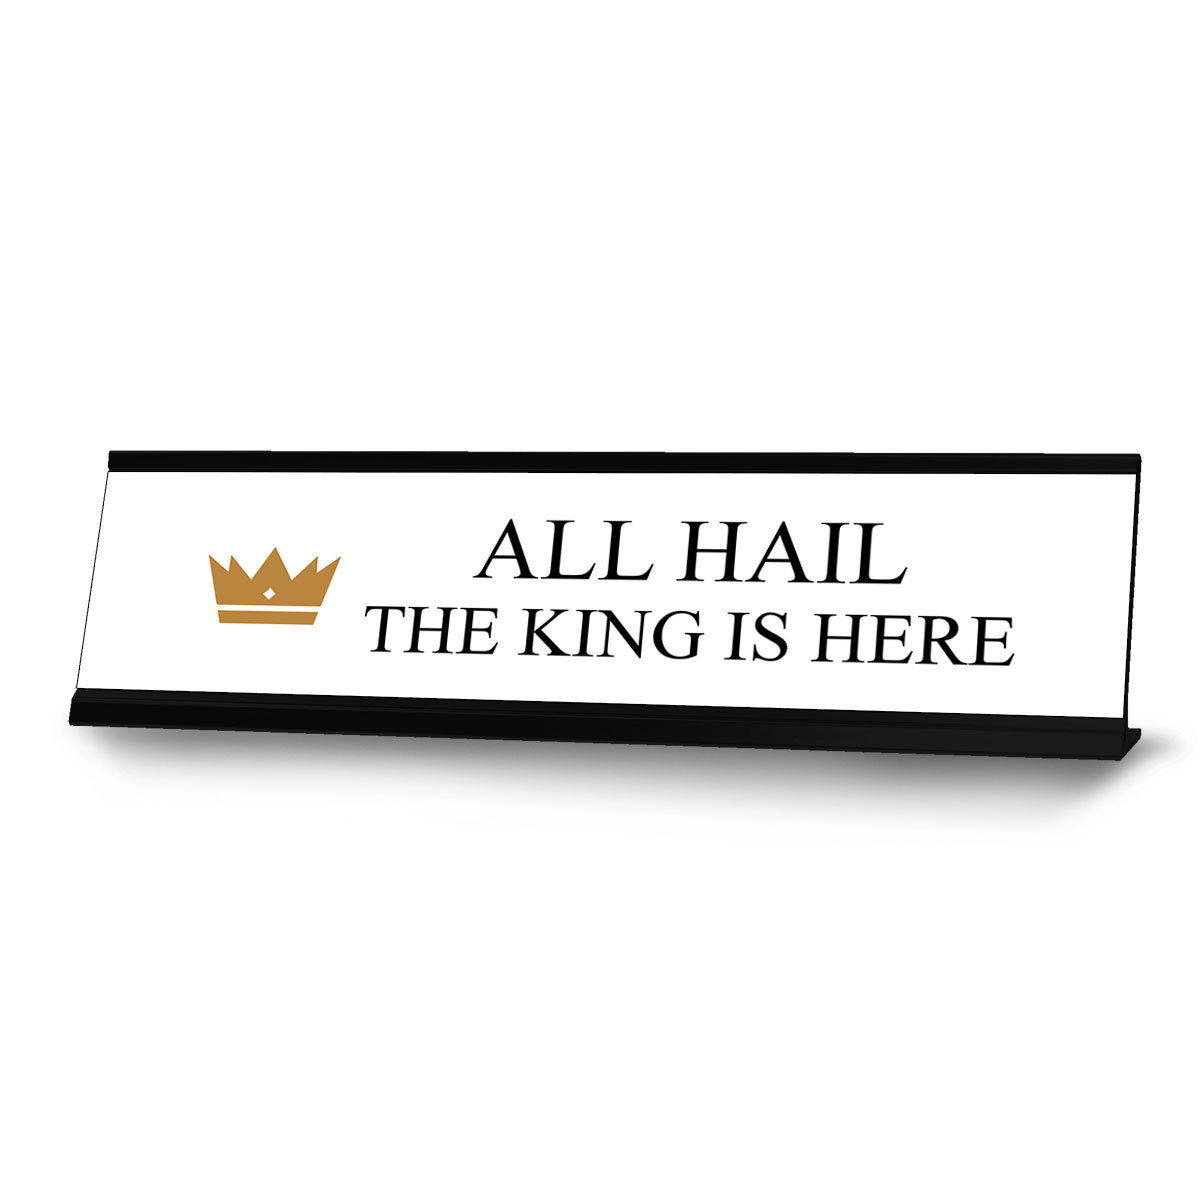 All Hail. The King is Here, Desk Sign (2 x 8")